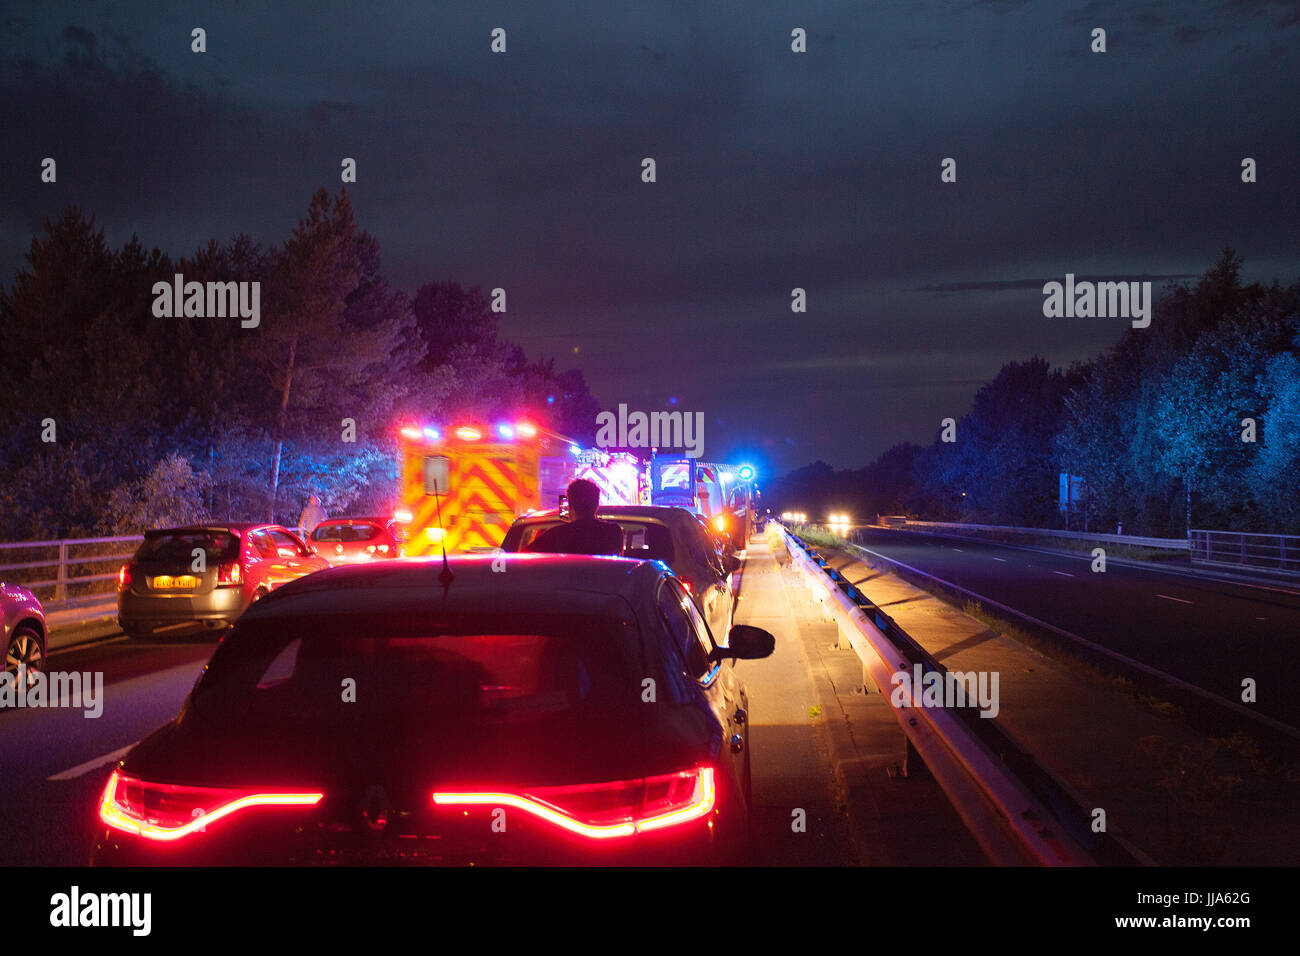 Flintshire, North, UK. 18th July, 2017. UK Weather. A serious road traffic accident this evening at Dobshill Interchange Emgergency Services at the Scene treating injured and Accident Investigation on Scene. Road clear of traffic by reversing off A55 into Dobshill down slip road. Credit: DGDImages/Alamy Live News Stock Photo